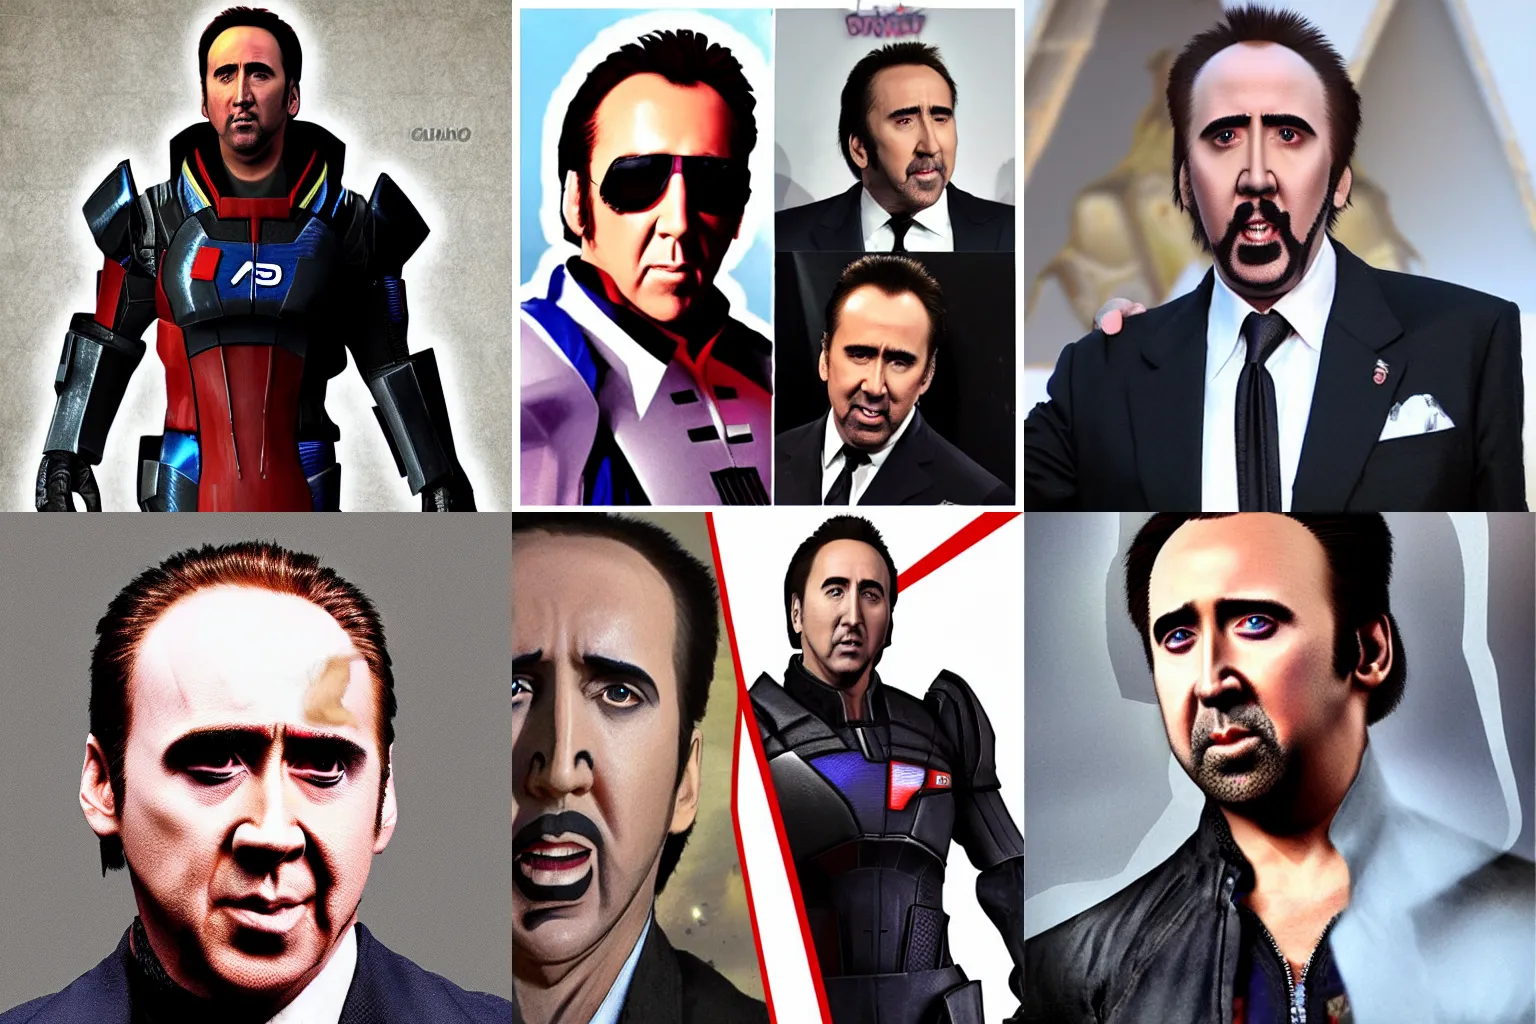 Prompt: Nicolas Cage dressed as a character from Mass Effect